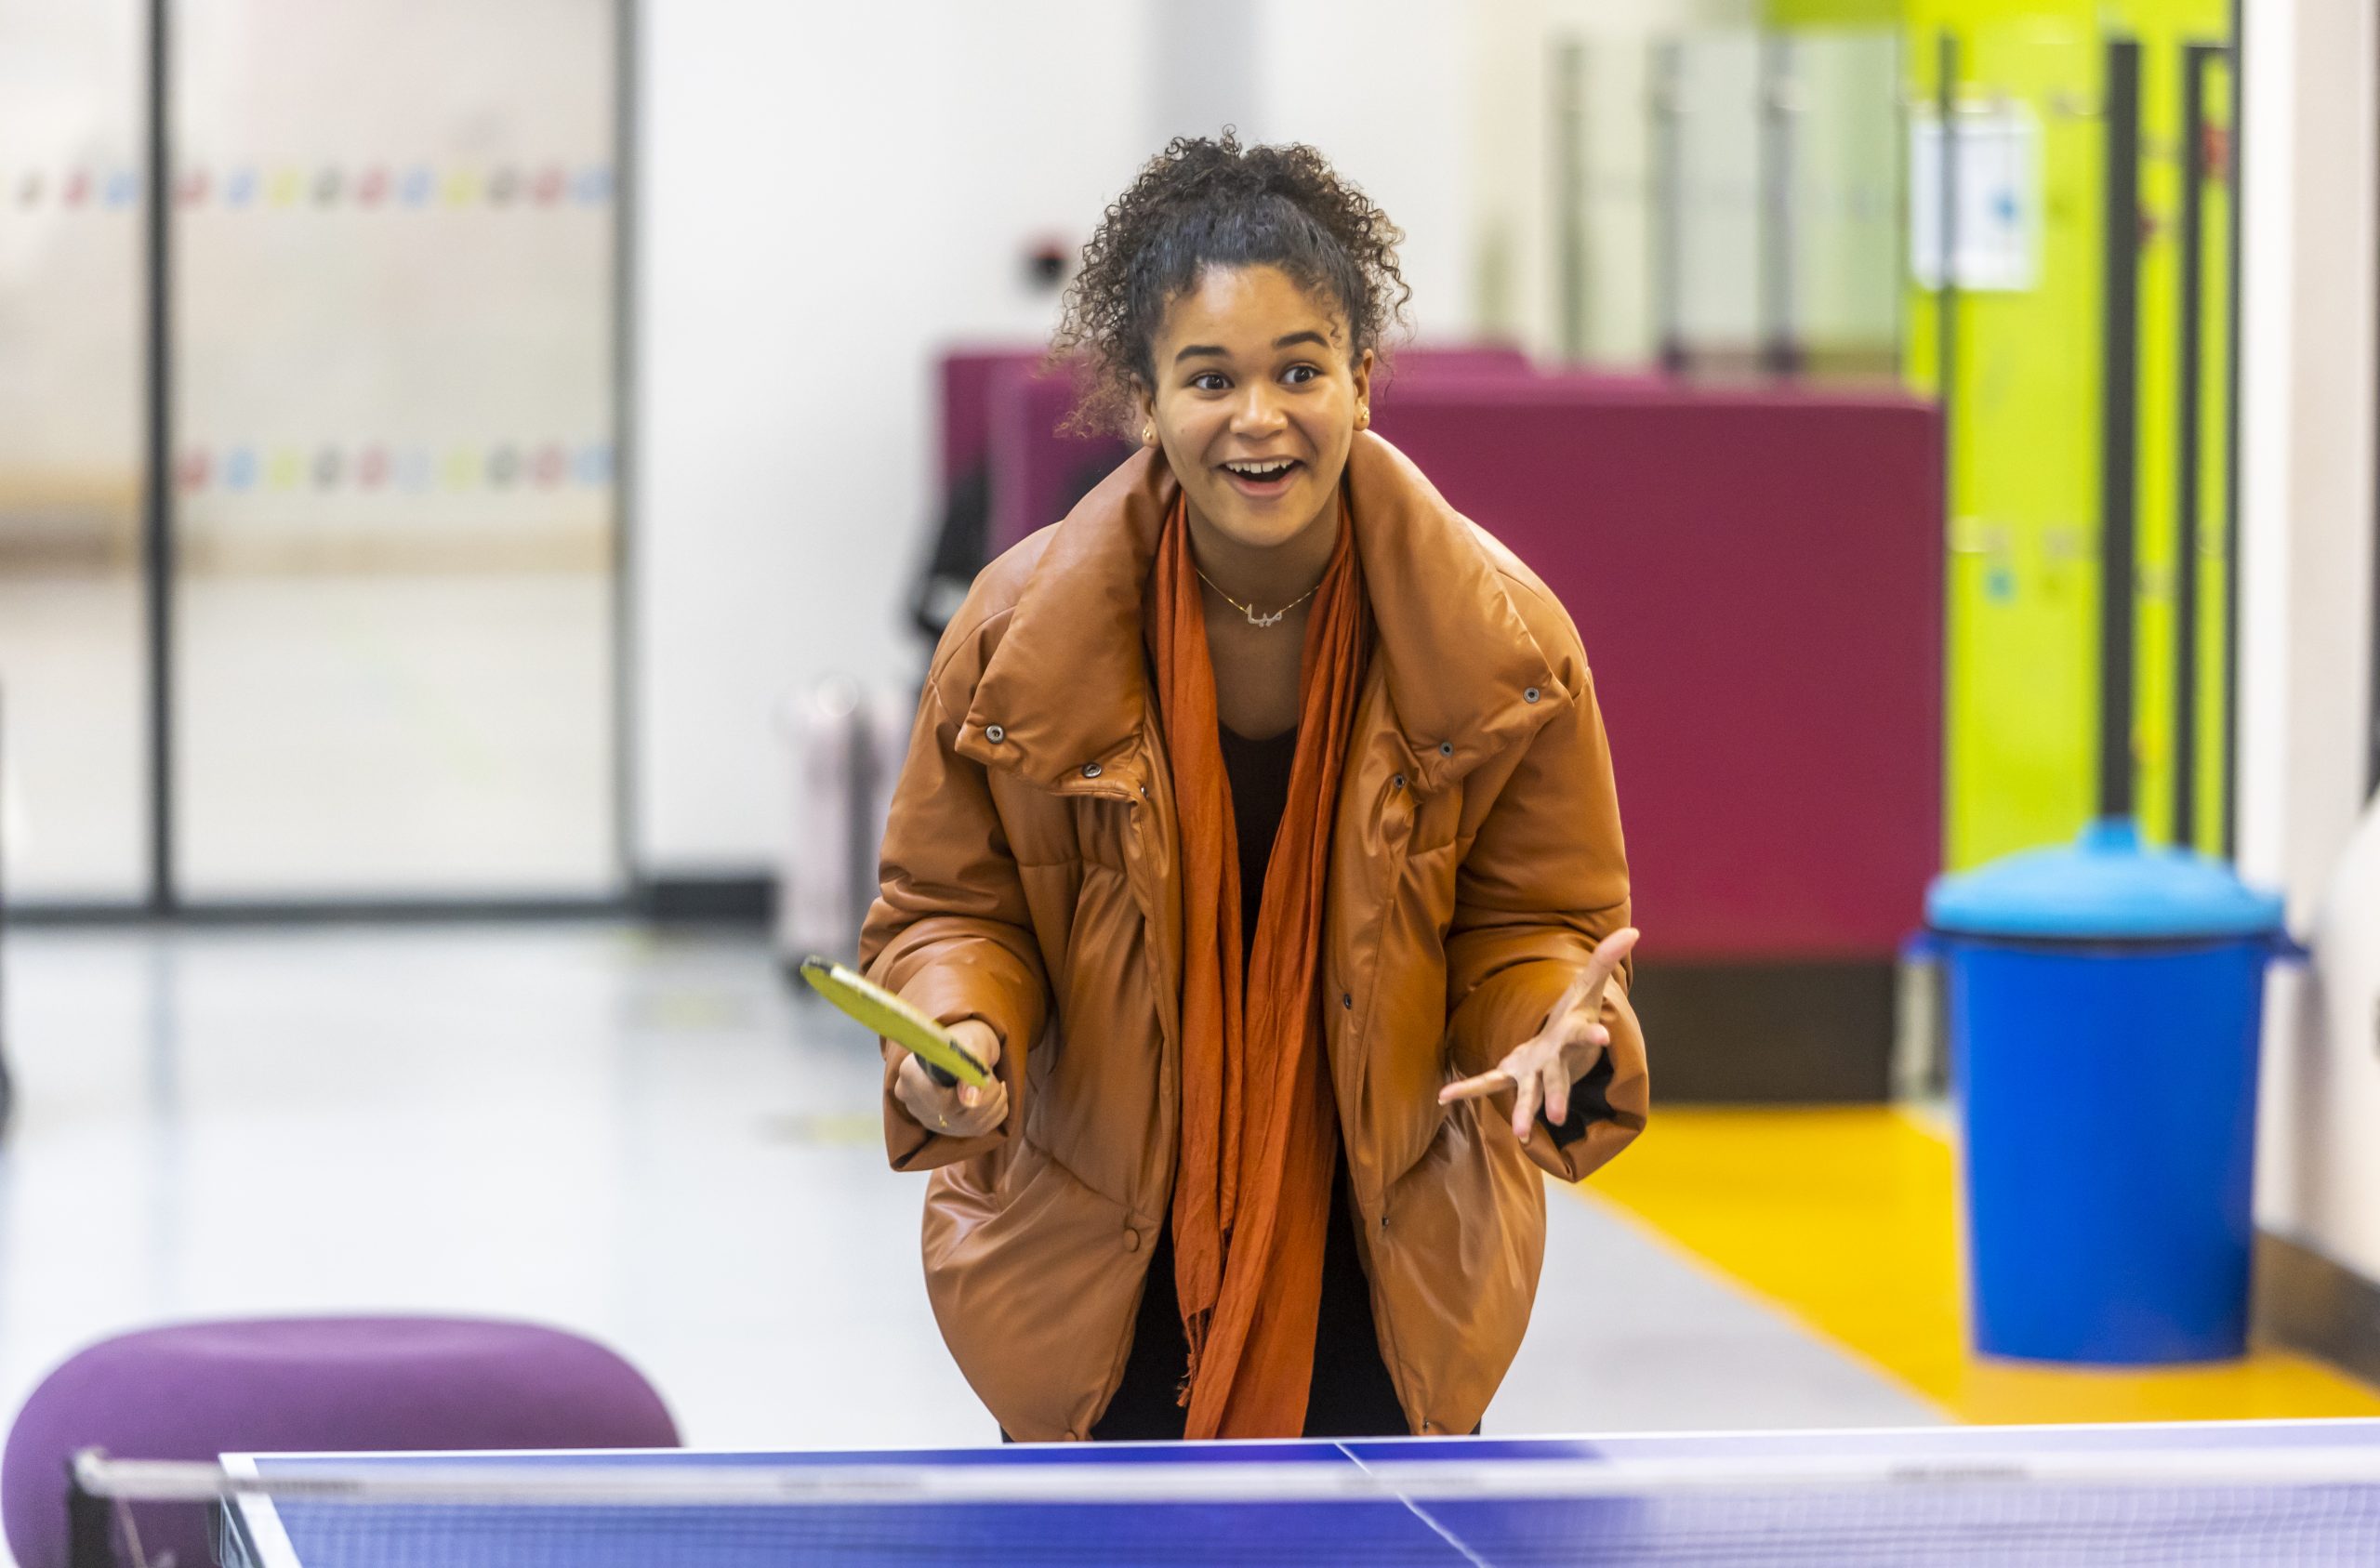 A young person is smiling as they play table tennis, describing how they blagged their way into a club for free